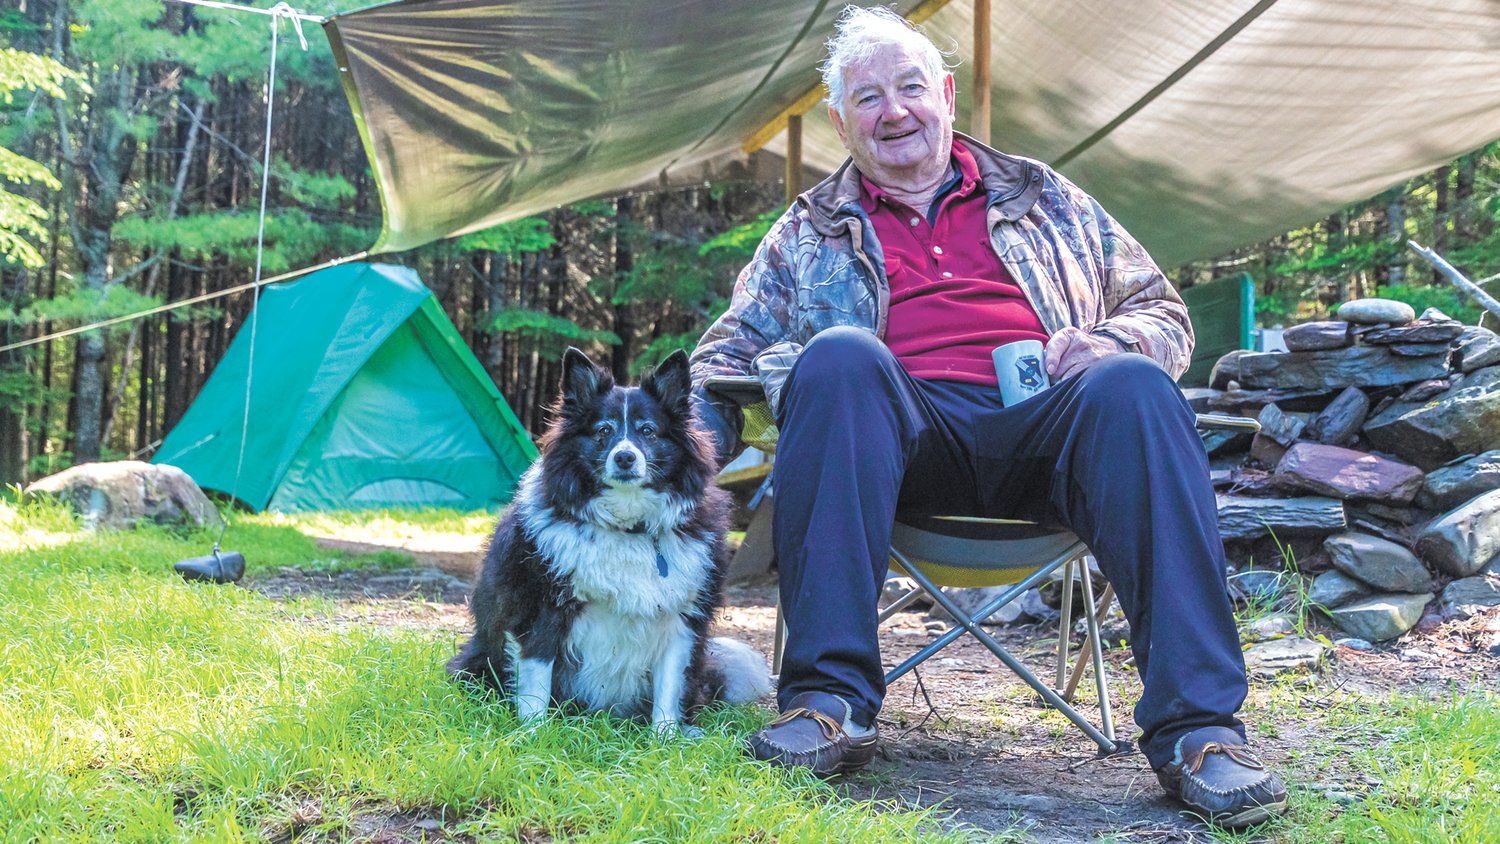 TRAIL ANGEL: Stephen Leavitt and his dog Penny who the trio met on Thoreau Island in Eagle Lake and whose generosity helped them tackle the last leg of the trail.